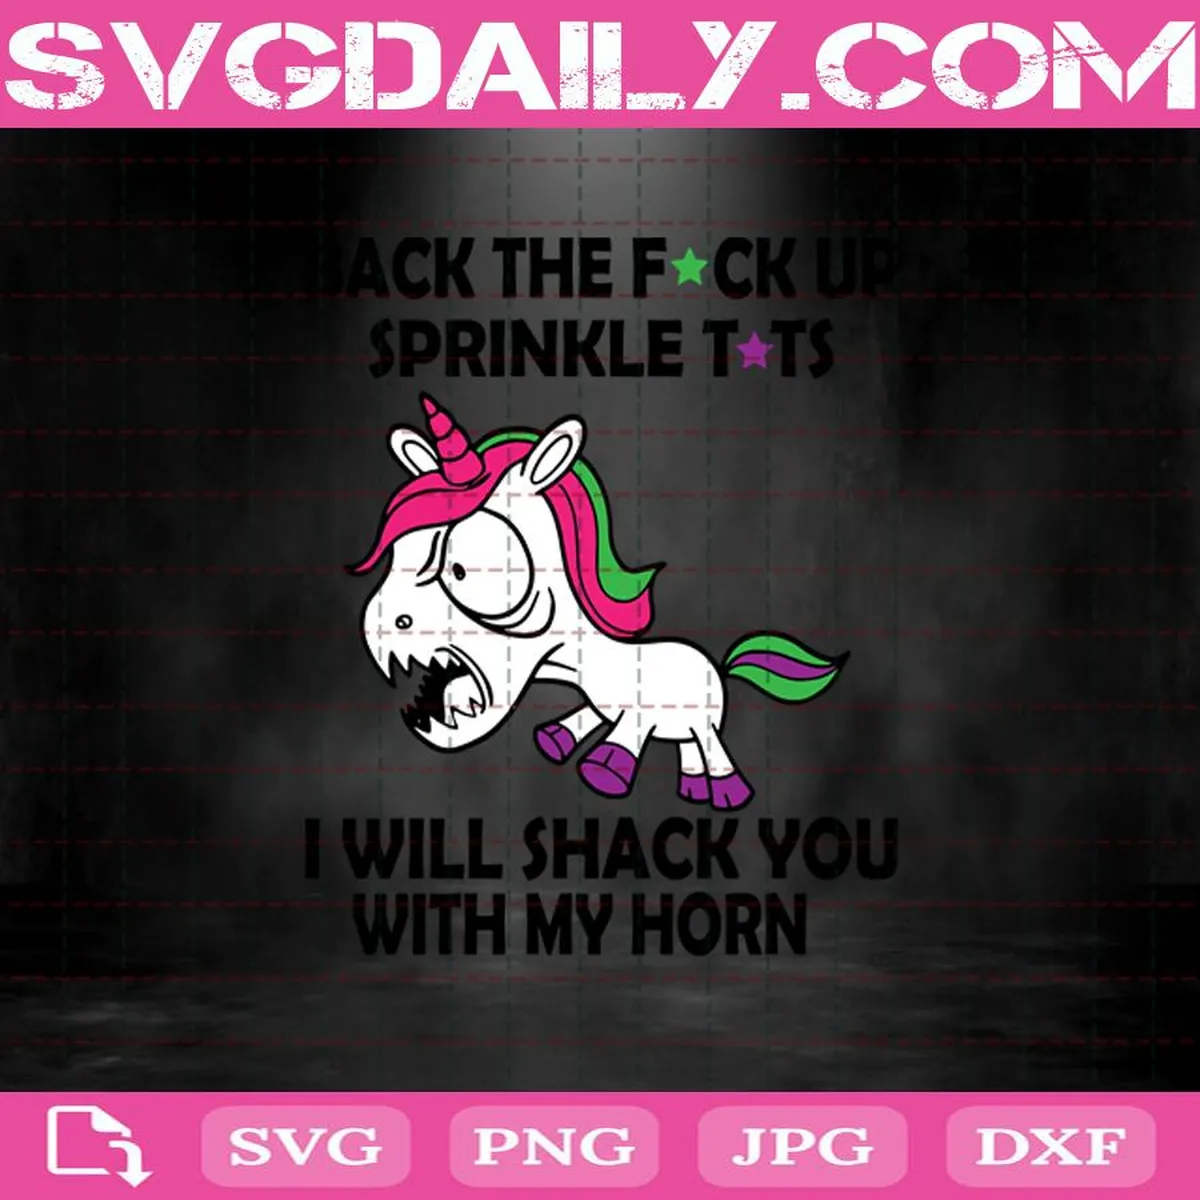 Unicorn Funny Svg, Back The Fuck Up Sprinkle Tits I Will Shank You With My Horn Svg, Unicorn Svg